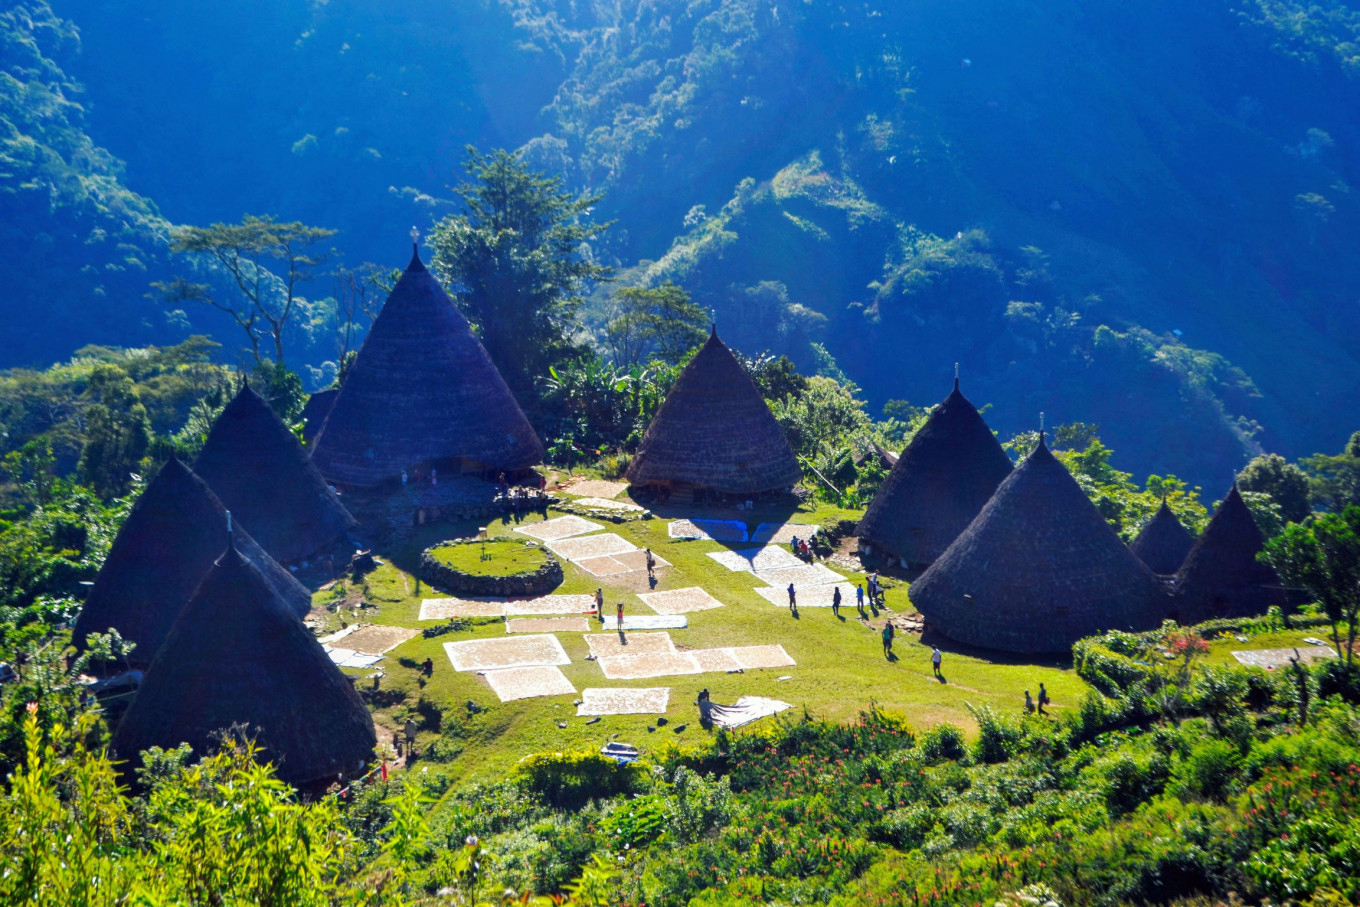 One of the most intriguing of these villages is Wae Rebo, located in the remote mountains of Flores island, in East Nusa Tenggara province. Wae Rebo is a traditional village that has preserved its customs and way of life, despite the encroachment of modernity and development in other parts of Indonesia